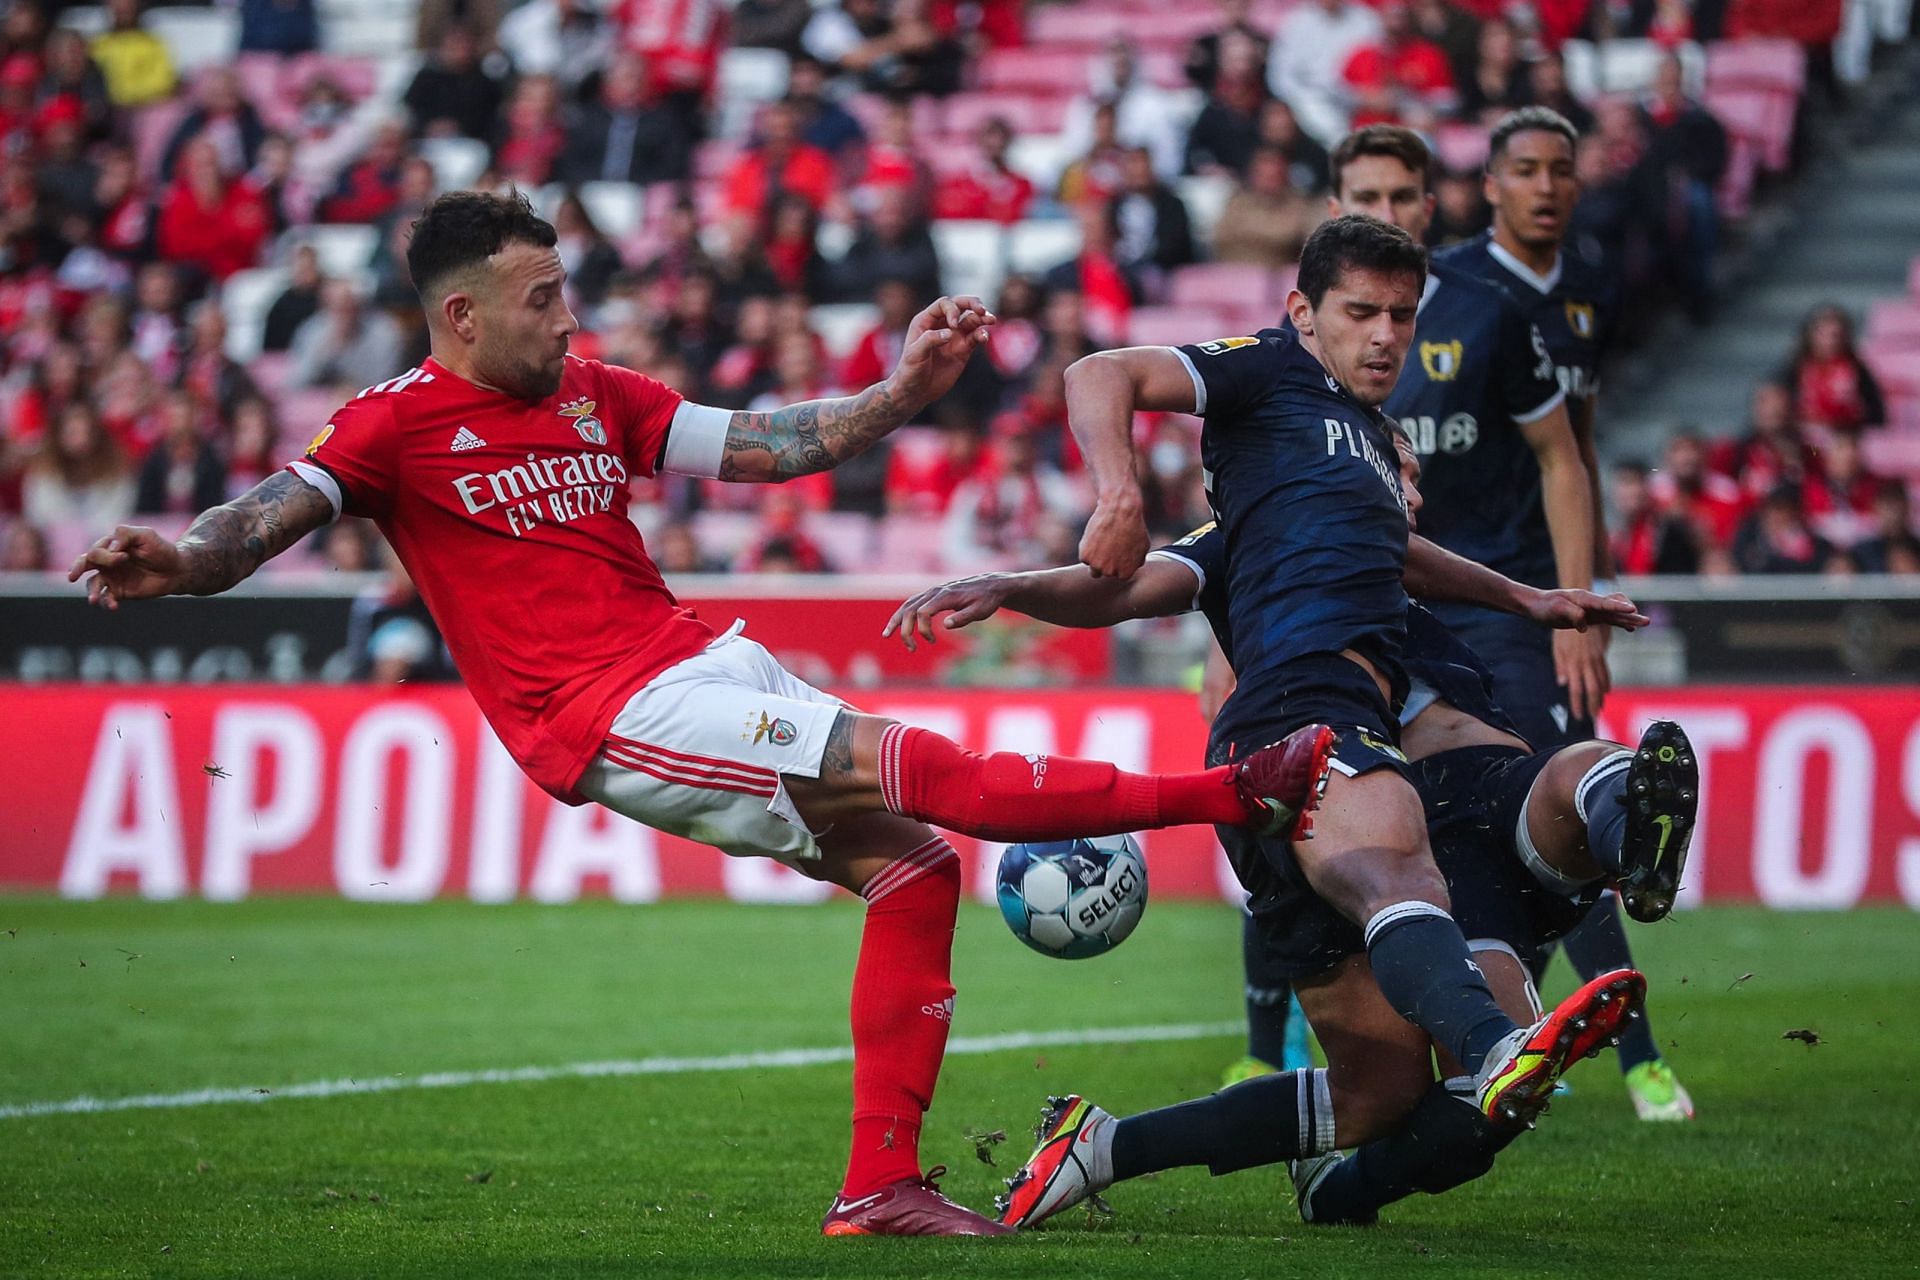 Benfica and Famalicao will meet in the Primeira Liga on Friday